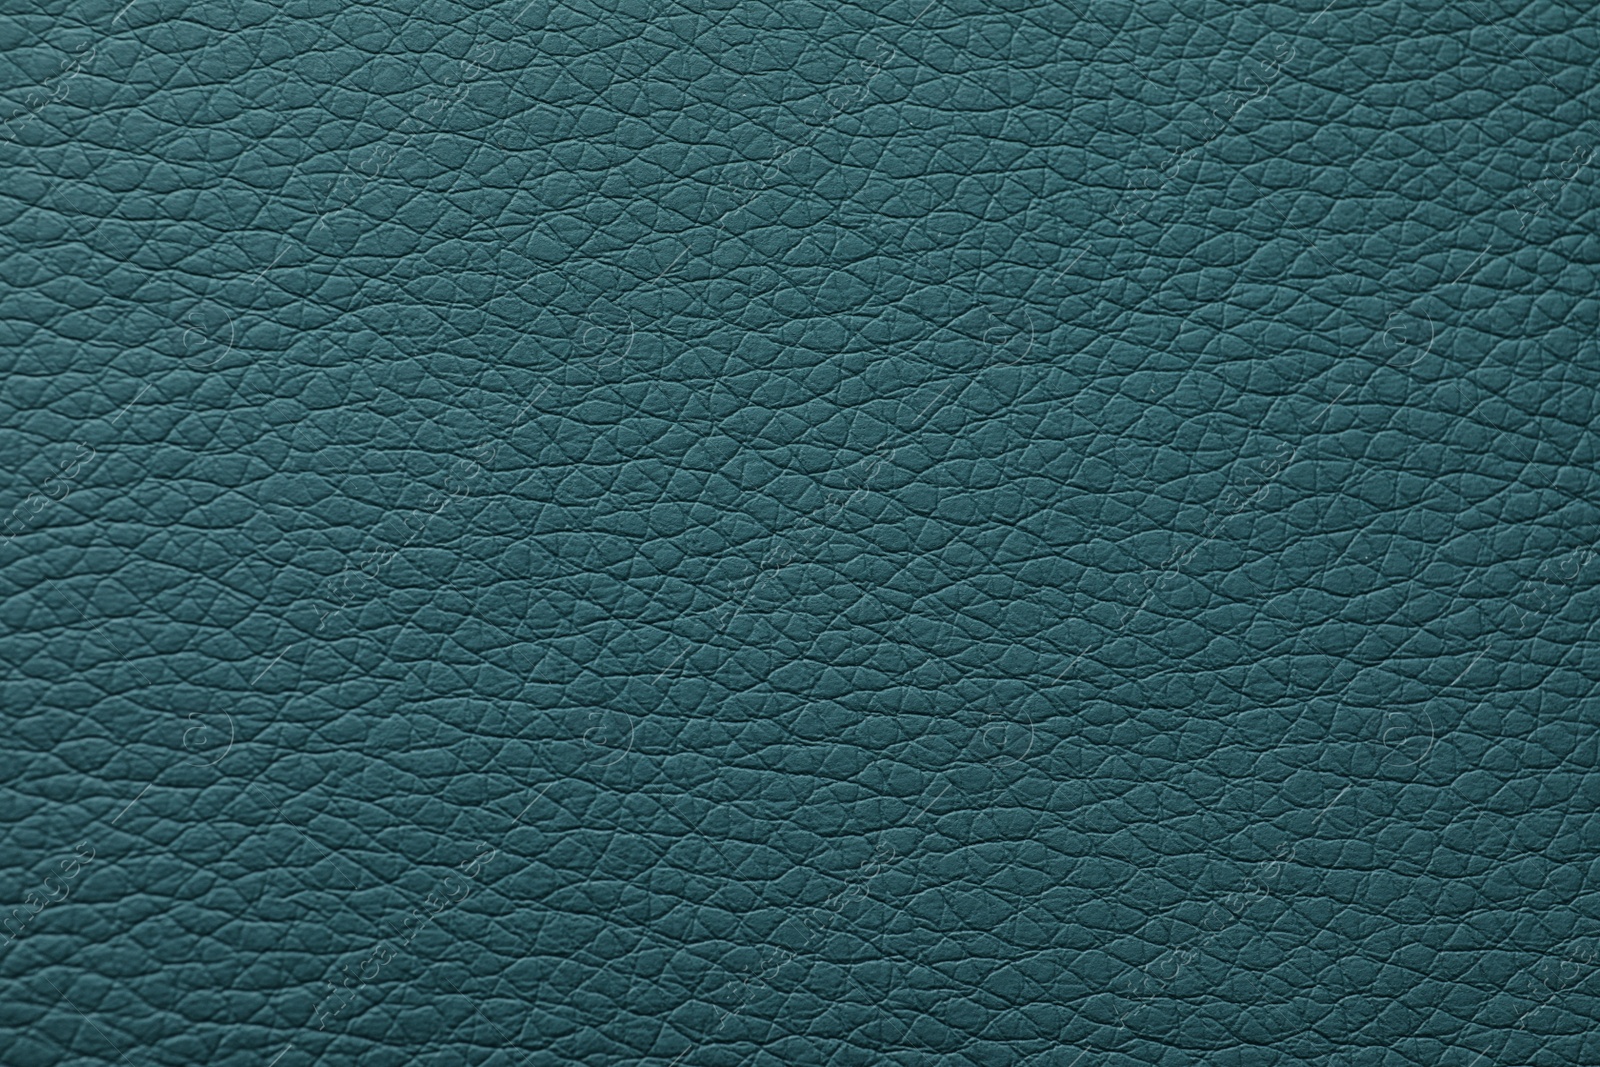 Photo of Texture of dark green leather as background, closeup